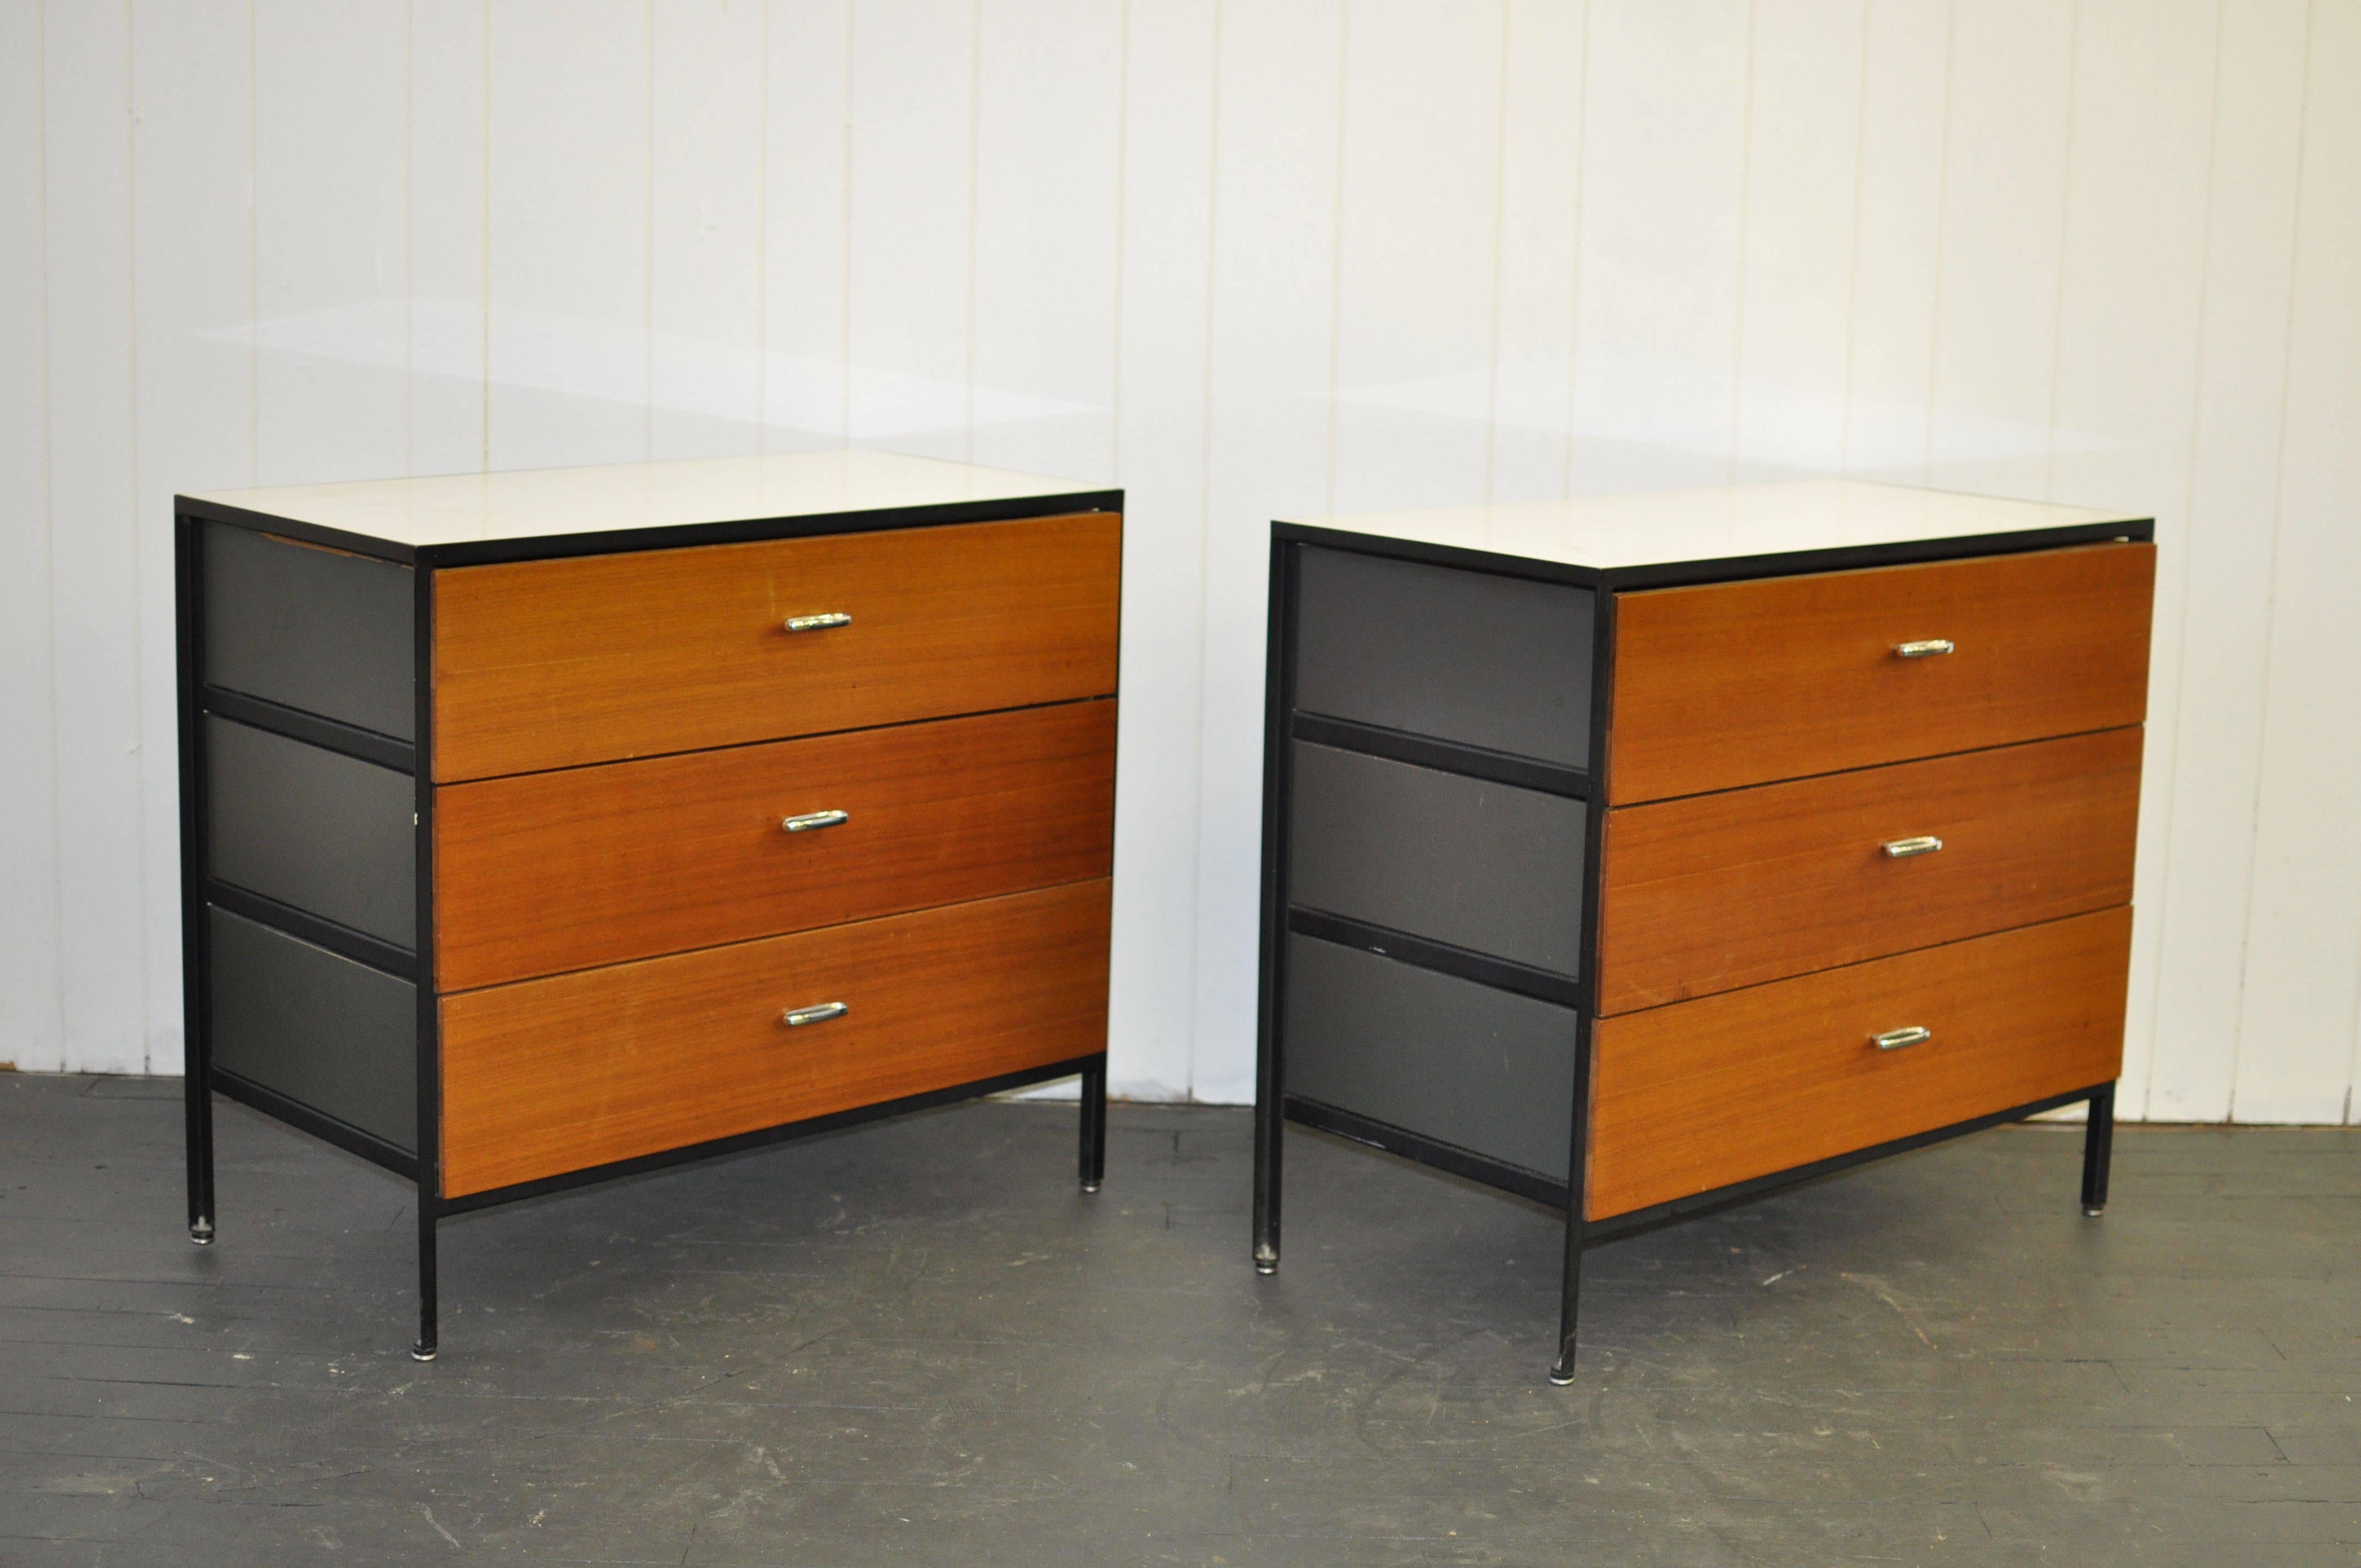 Pair of George Nelson steel frame dressers. Natural wood walnut drawers fronts. Matte dark grey/green painted sides. White laminate top.